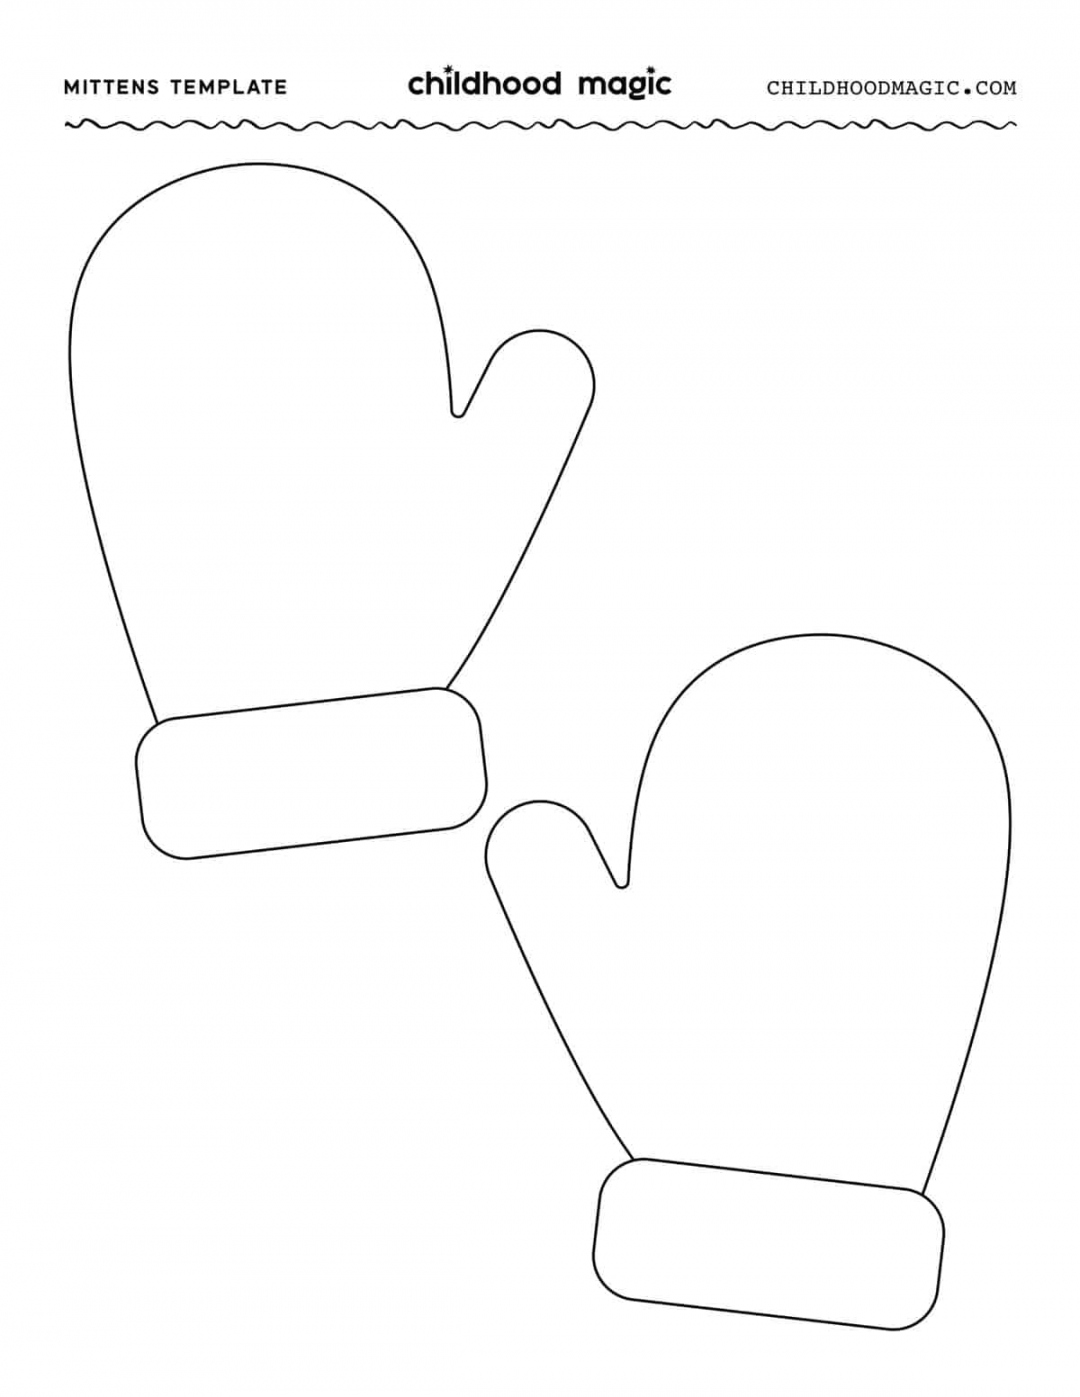 Mittens Template - Free Printable - Childhood Magic - FREE Printables - Mitten Cut Out